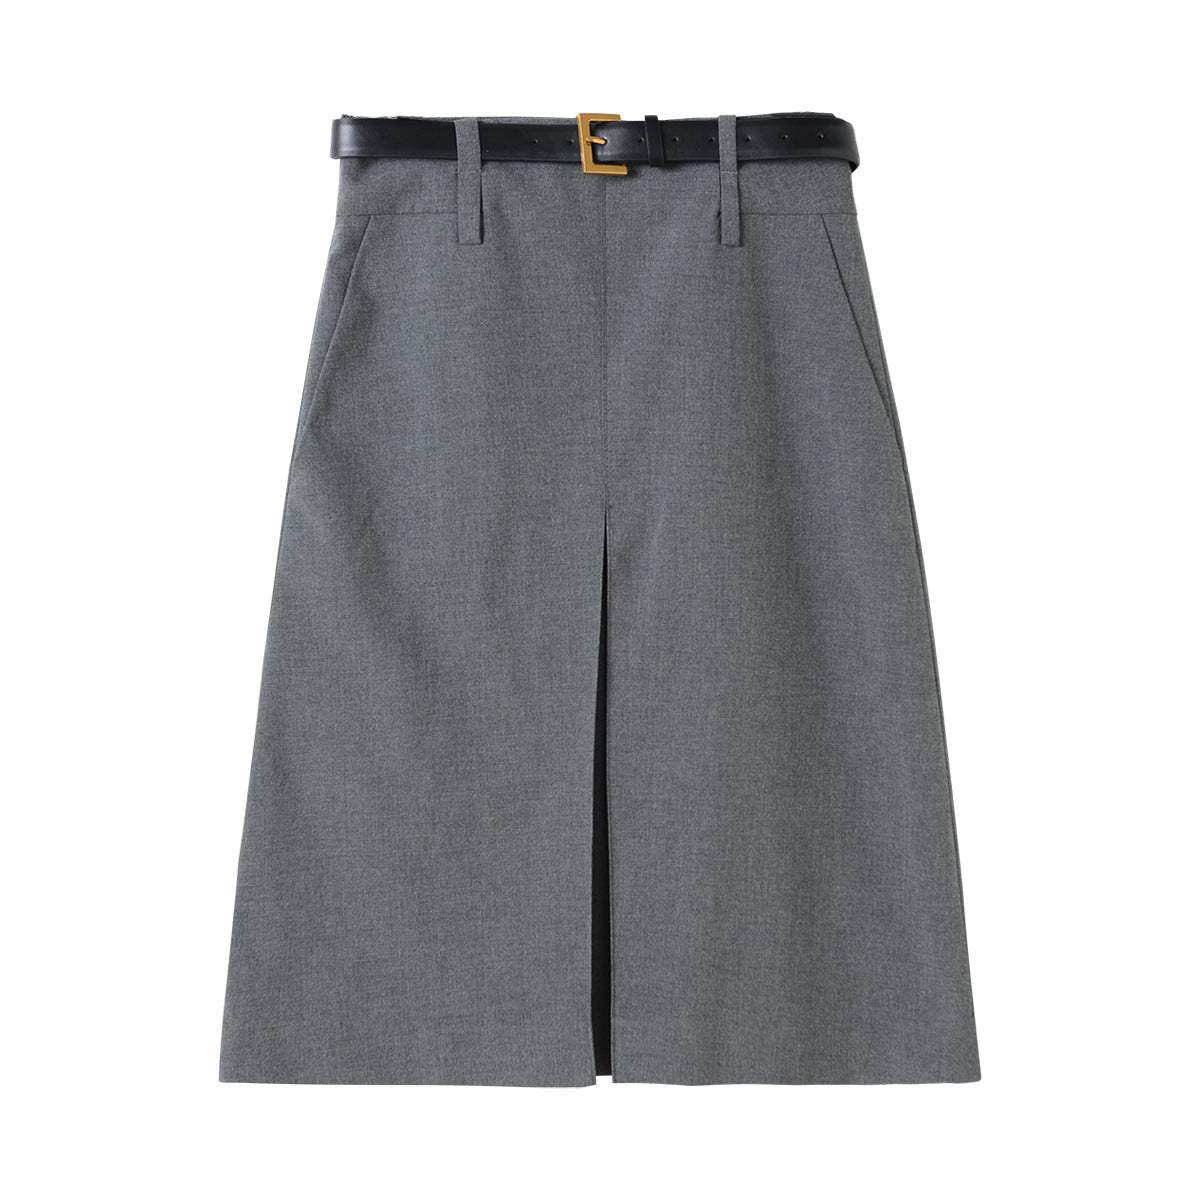 Women's Skirt Gray Worsted Pleated Suit A- Line Skirt Business Wear